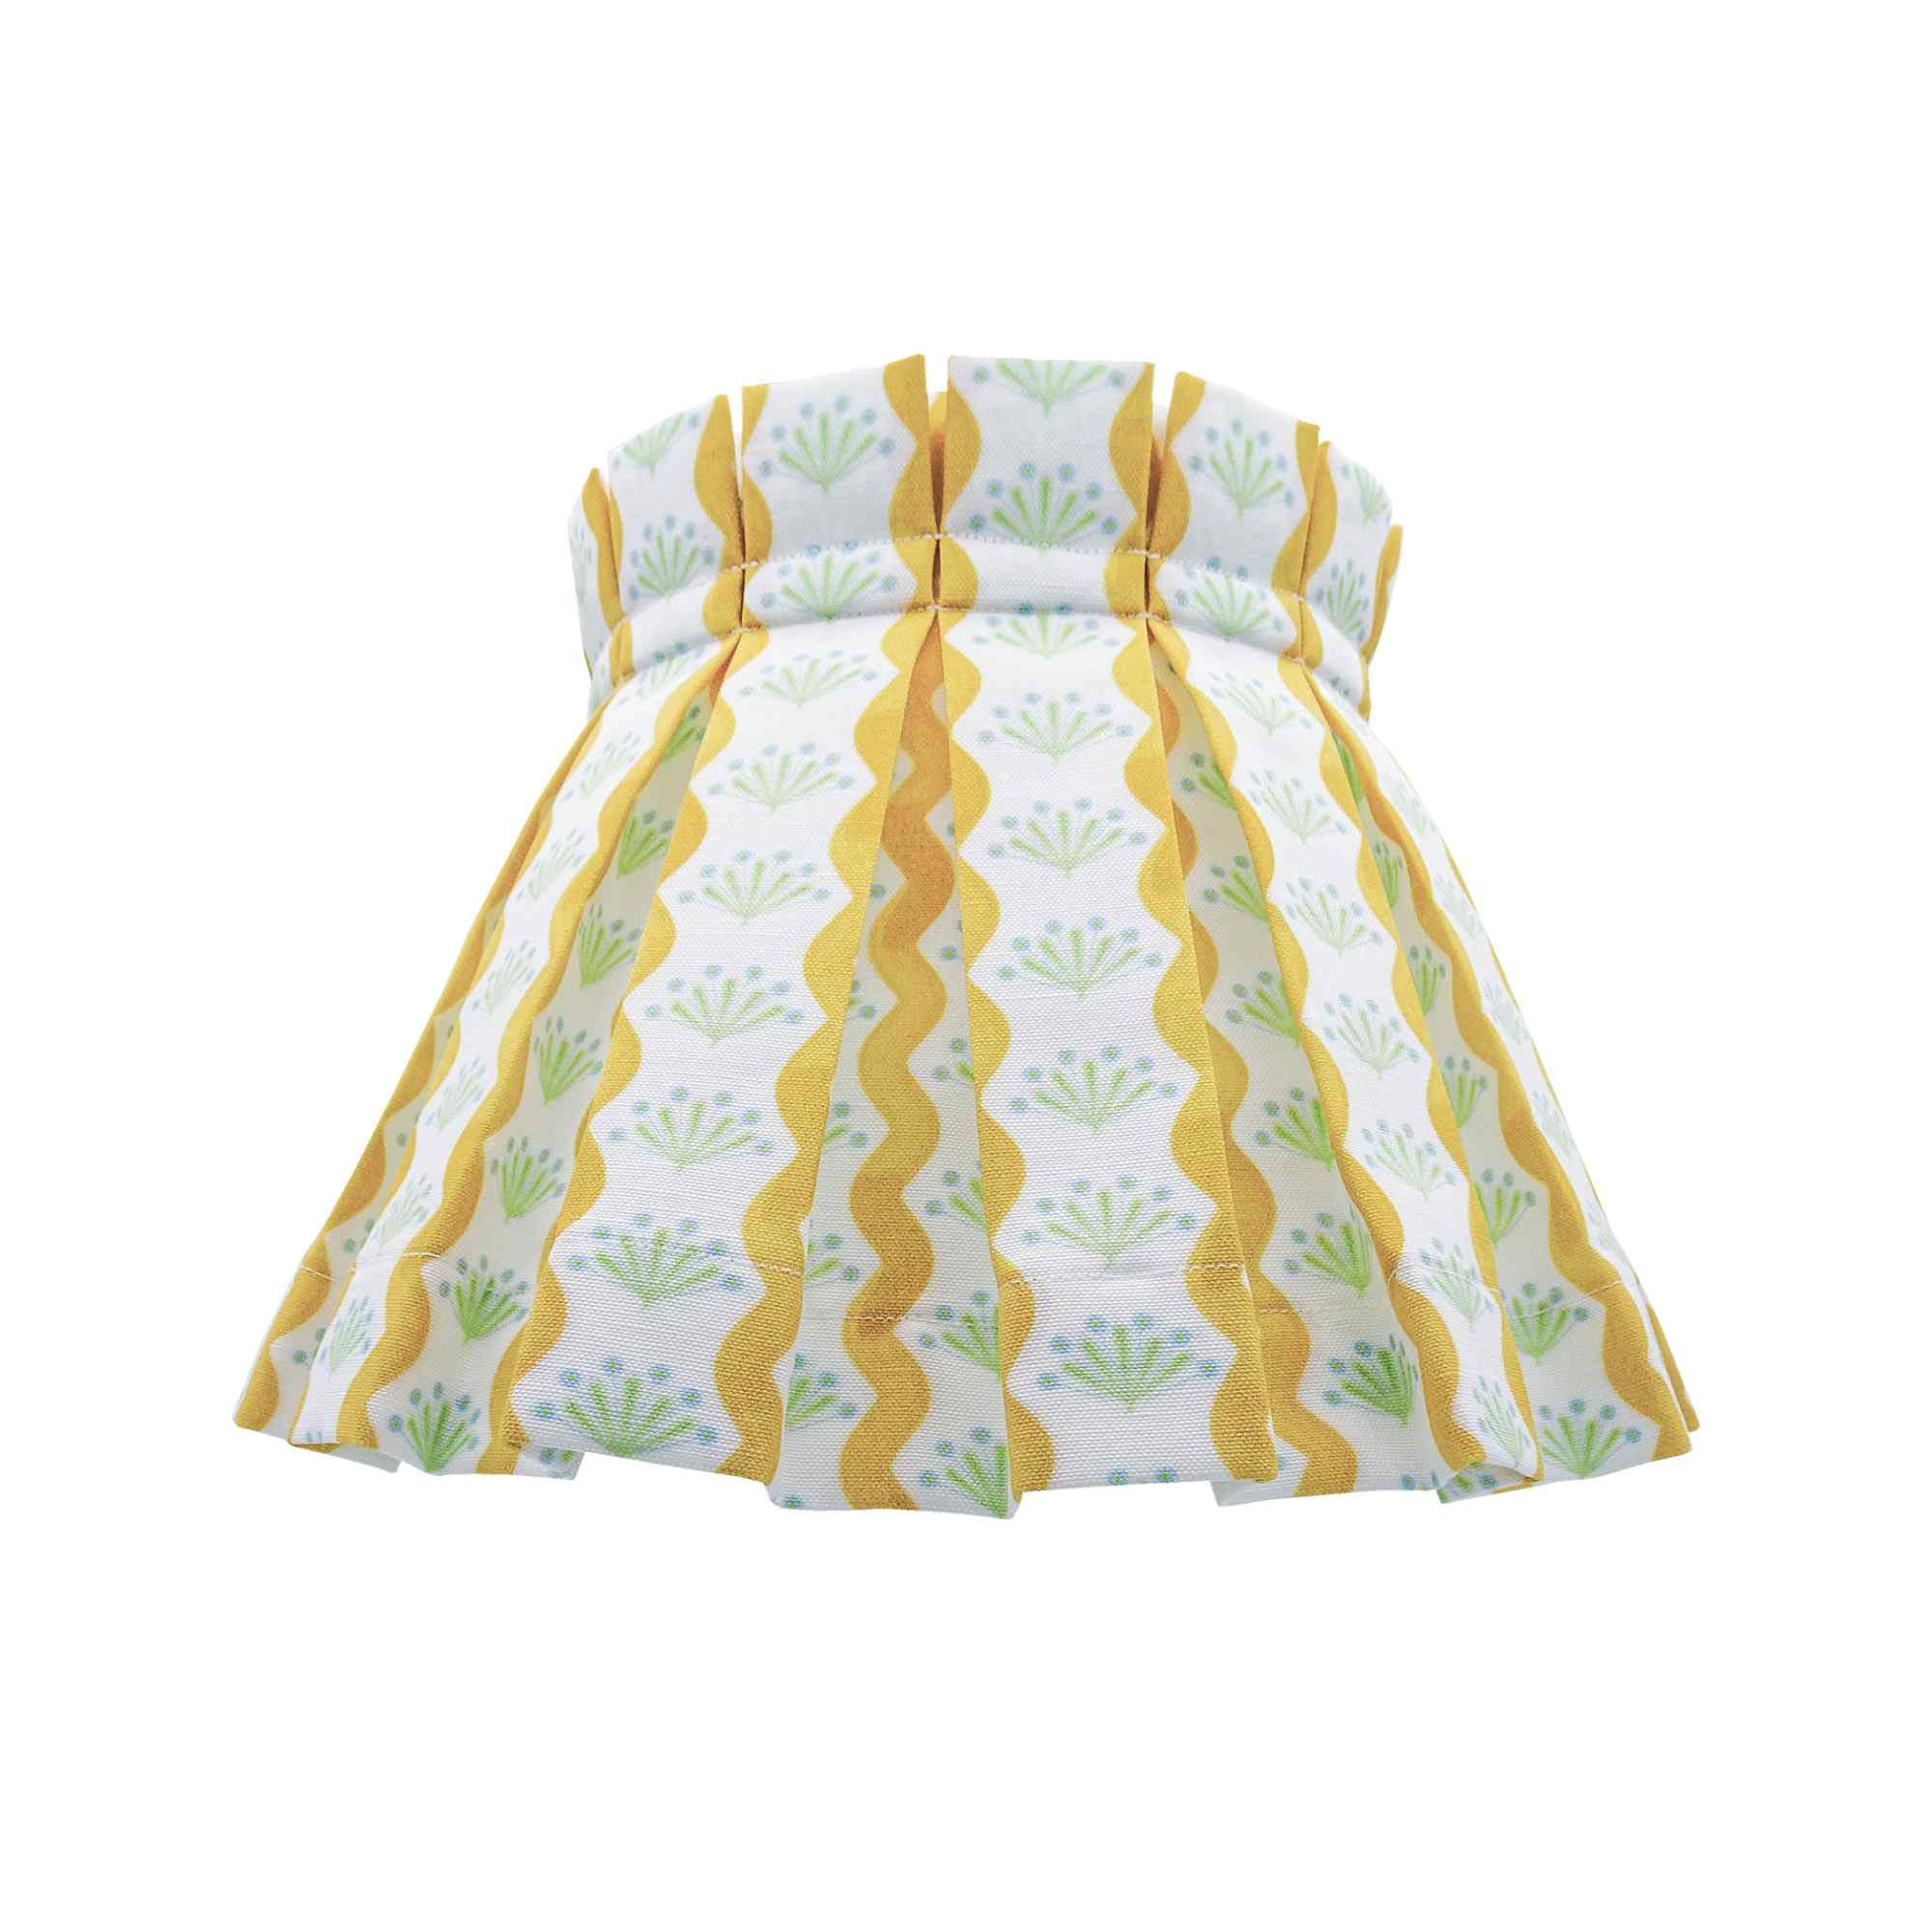 yellow floral motif and wavy stripes lampshade in pleated style gives a english country and french country vibe. Colorful design.